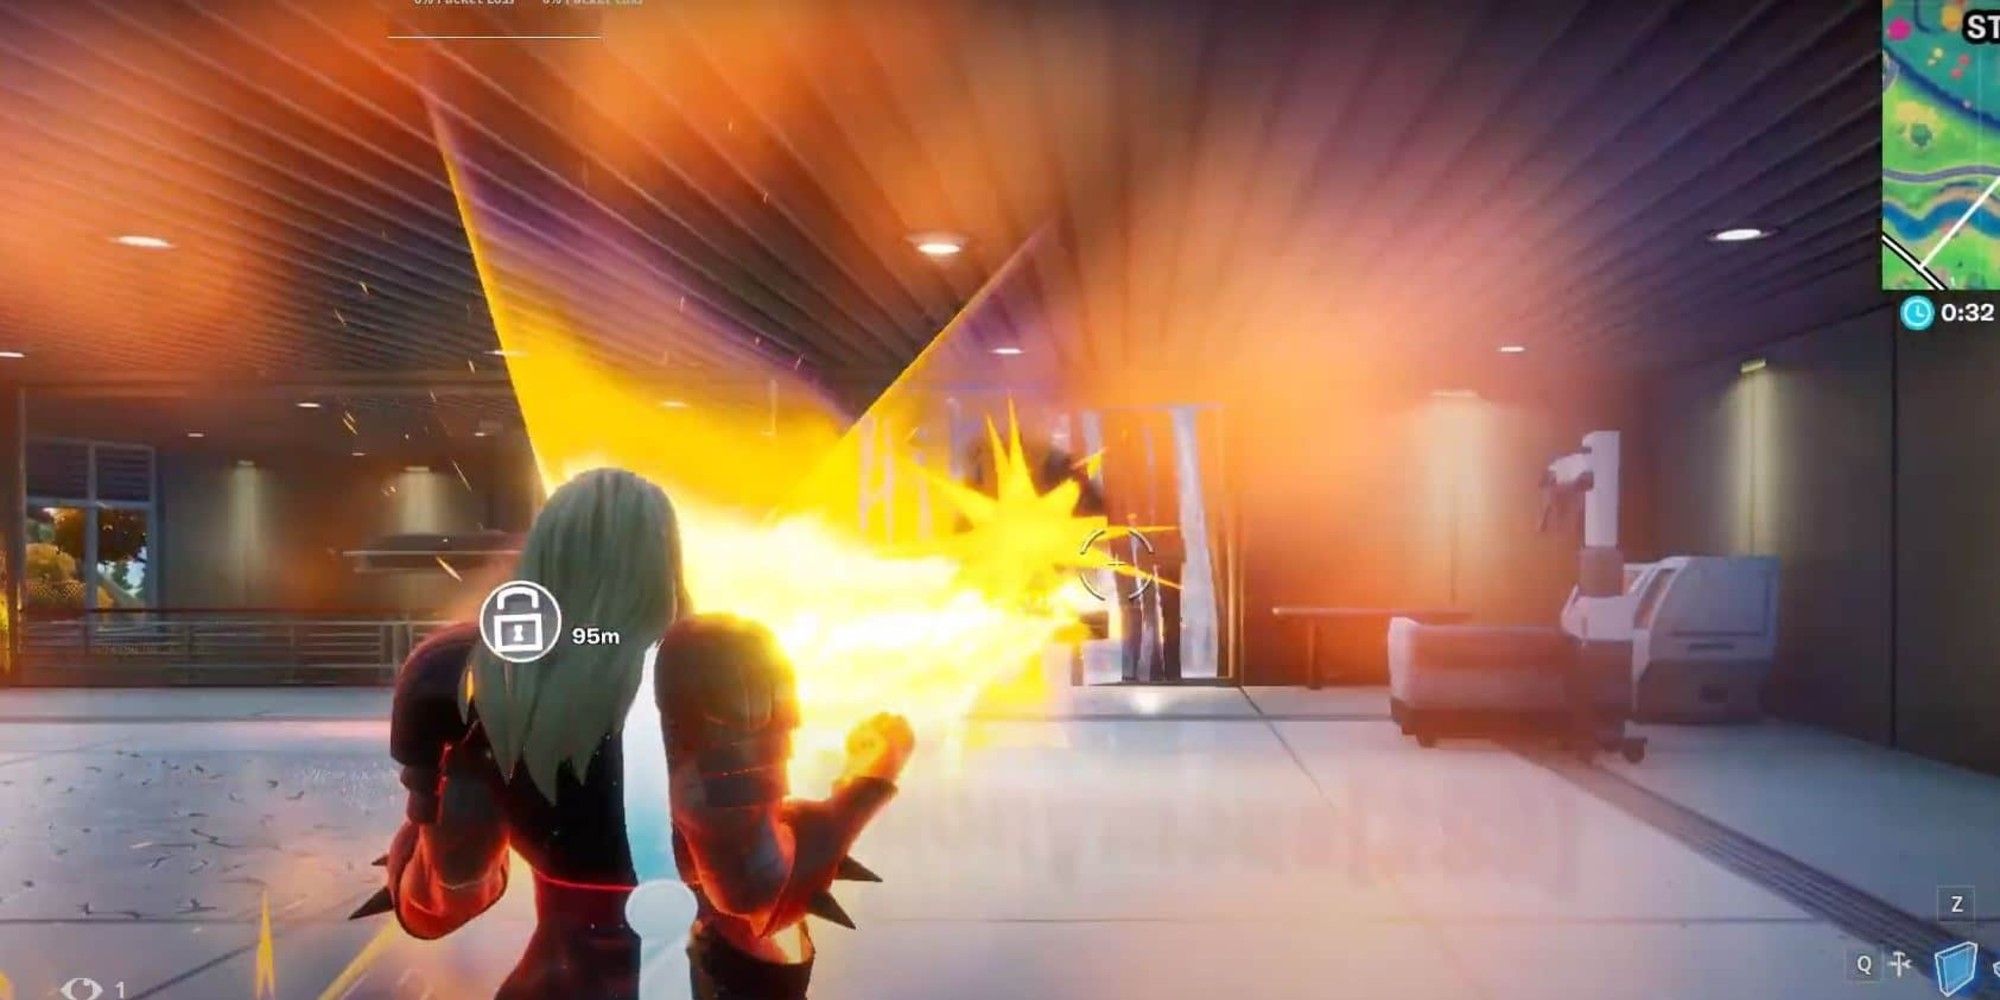 A player uses Iron Man's Mythic Weapons in Marvel Knockout mode in Fortnite Season 4